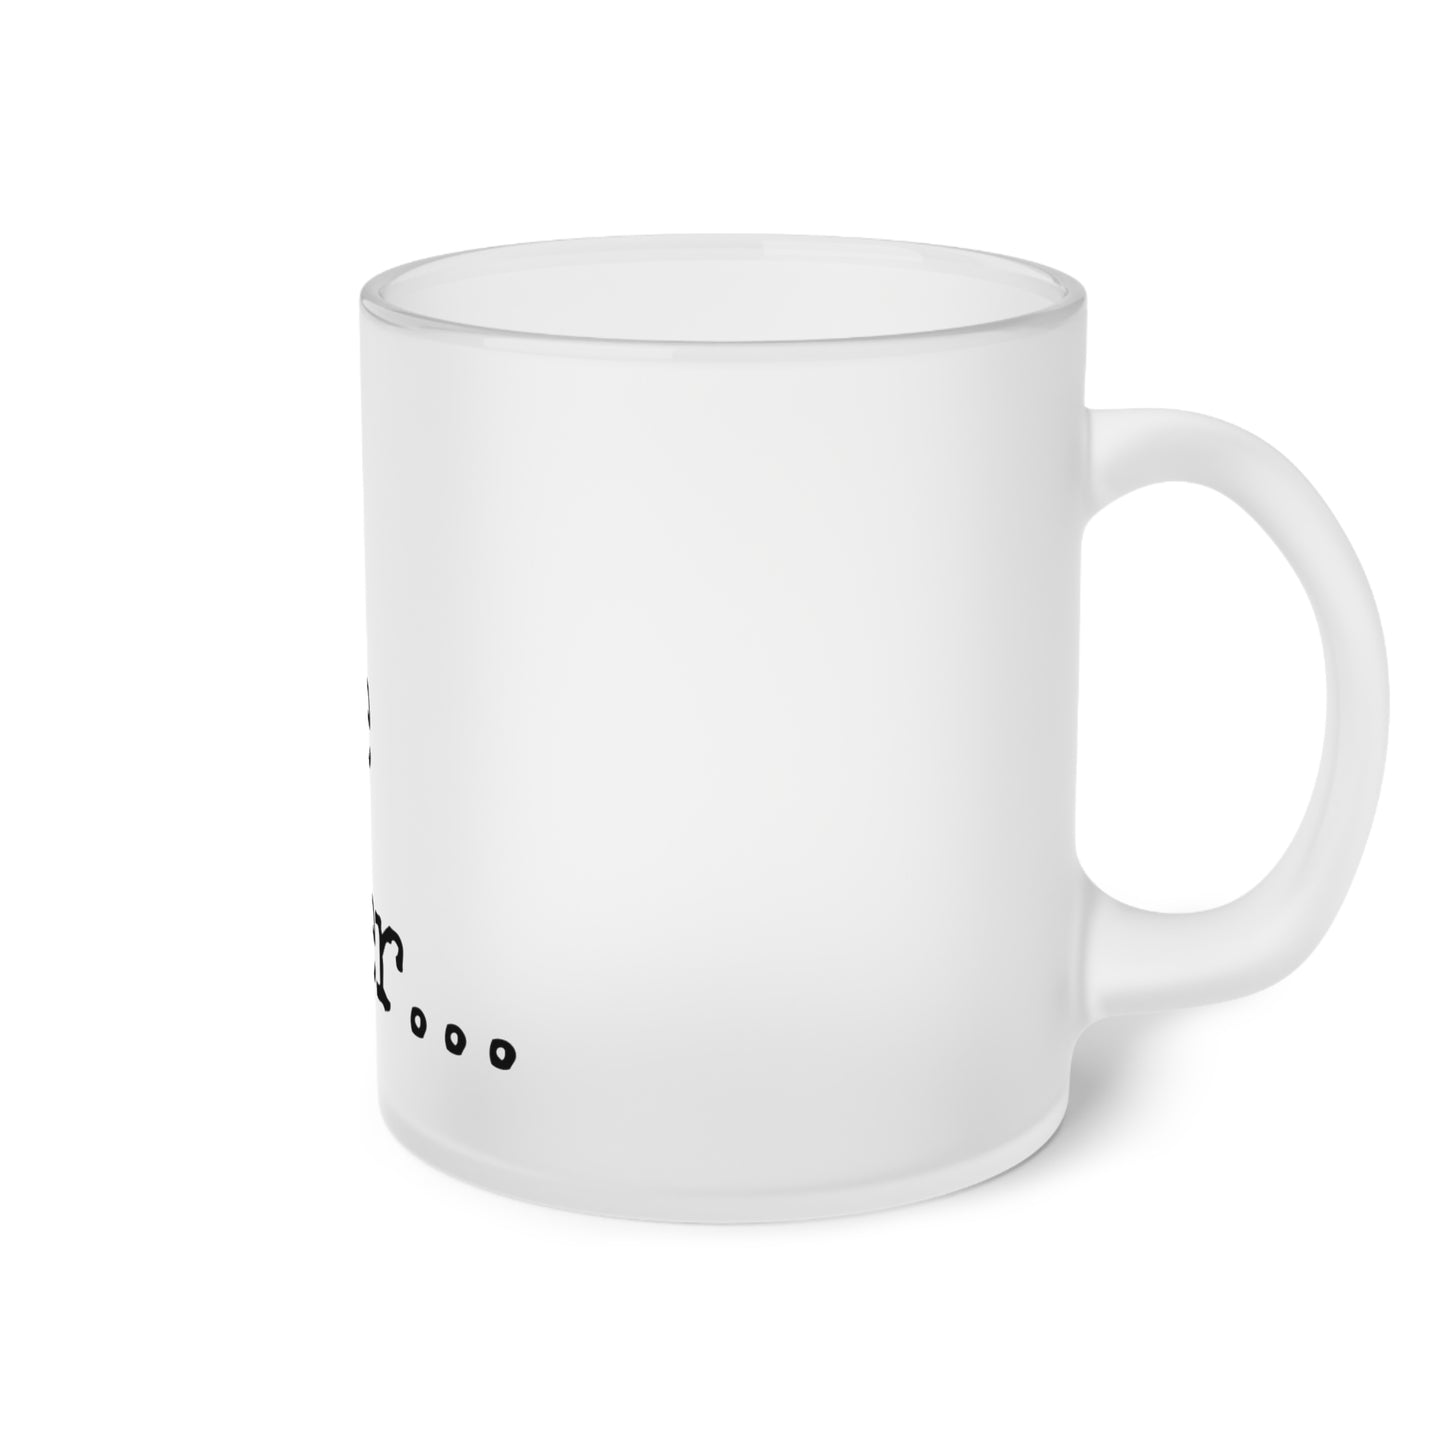 Frosted Glass Mug With Text: I have Never...